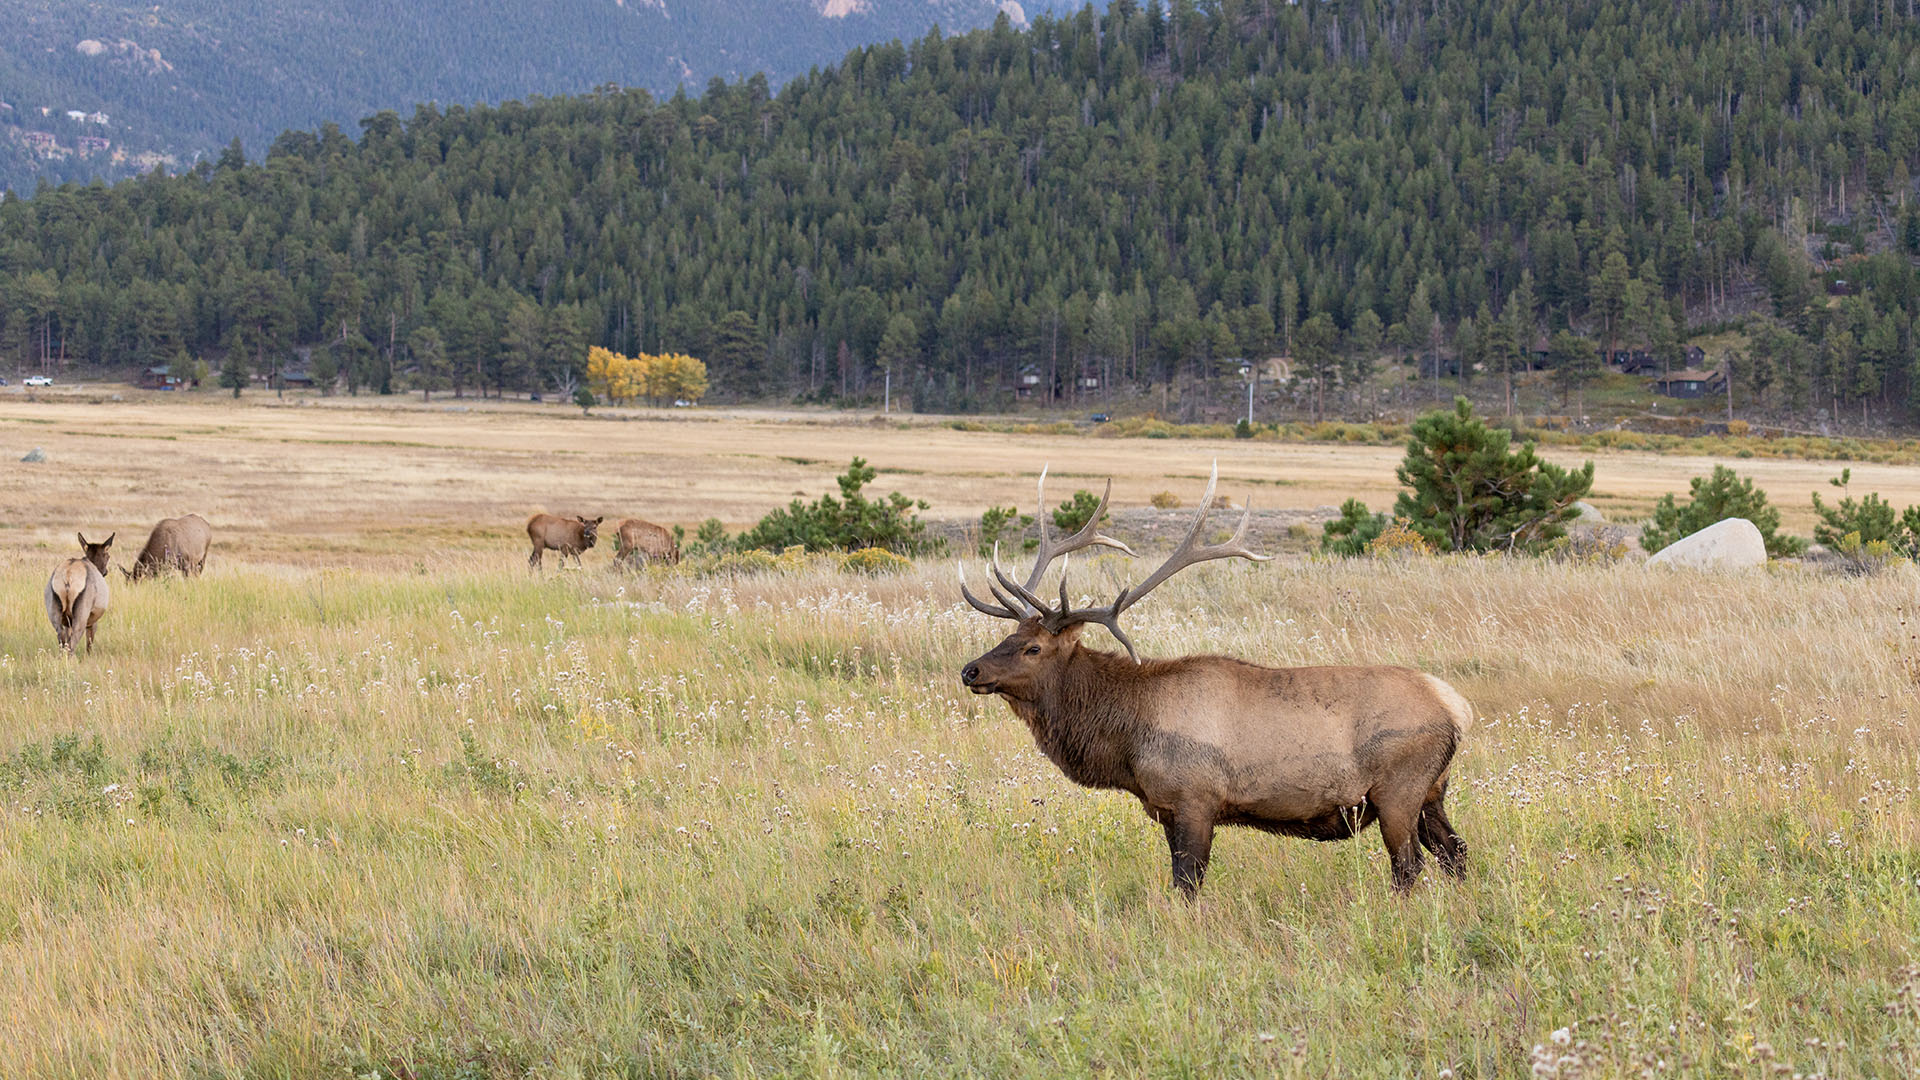 Elk at the Rocky Mountain National Park.